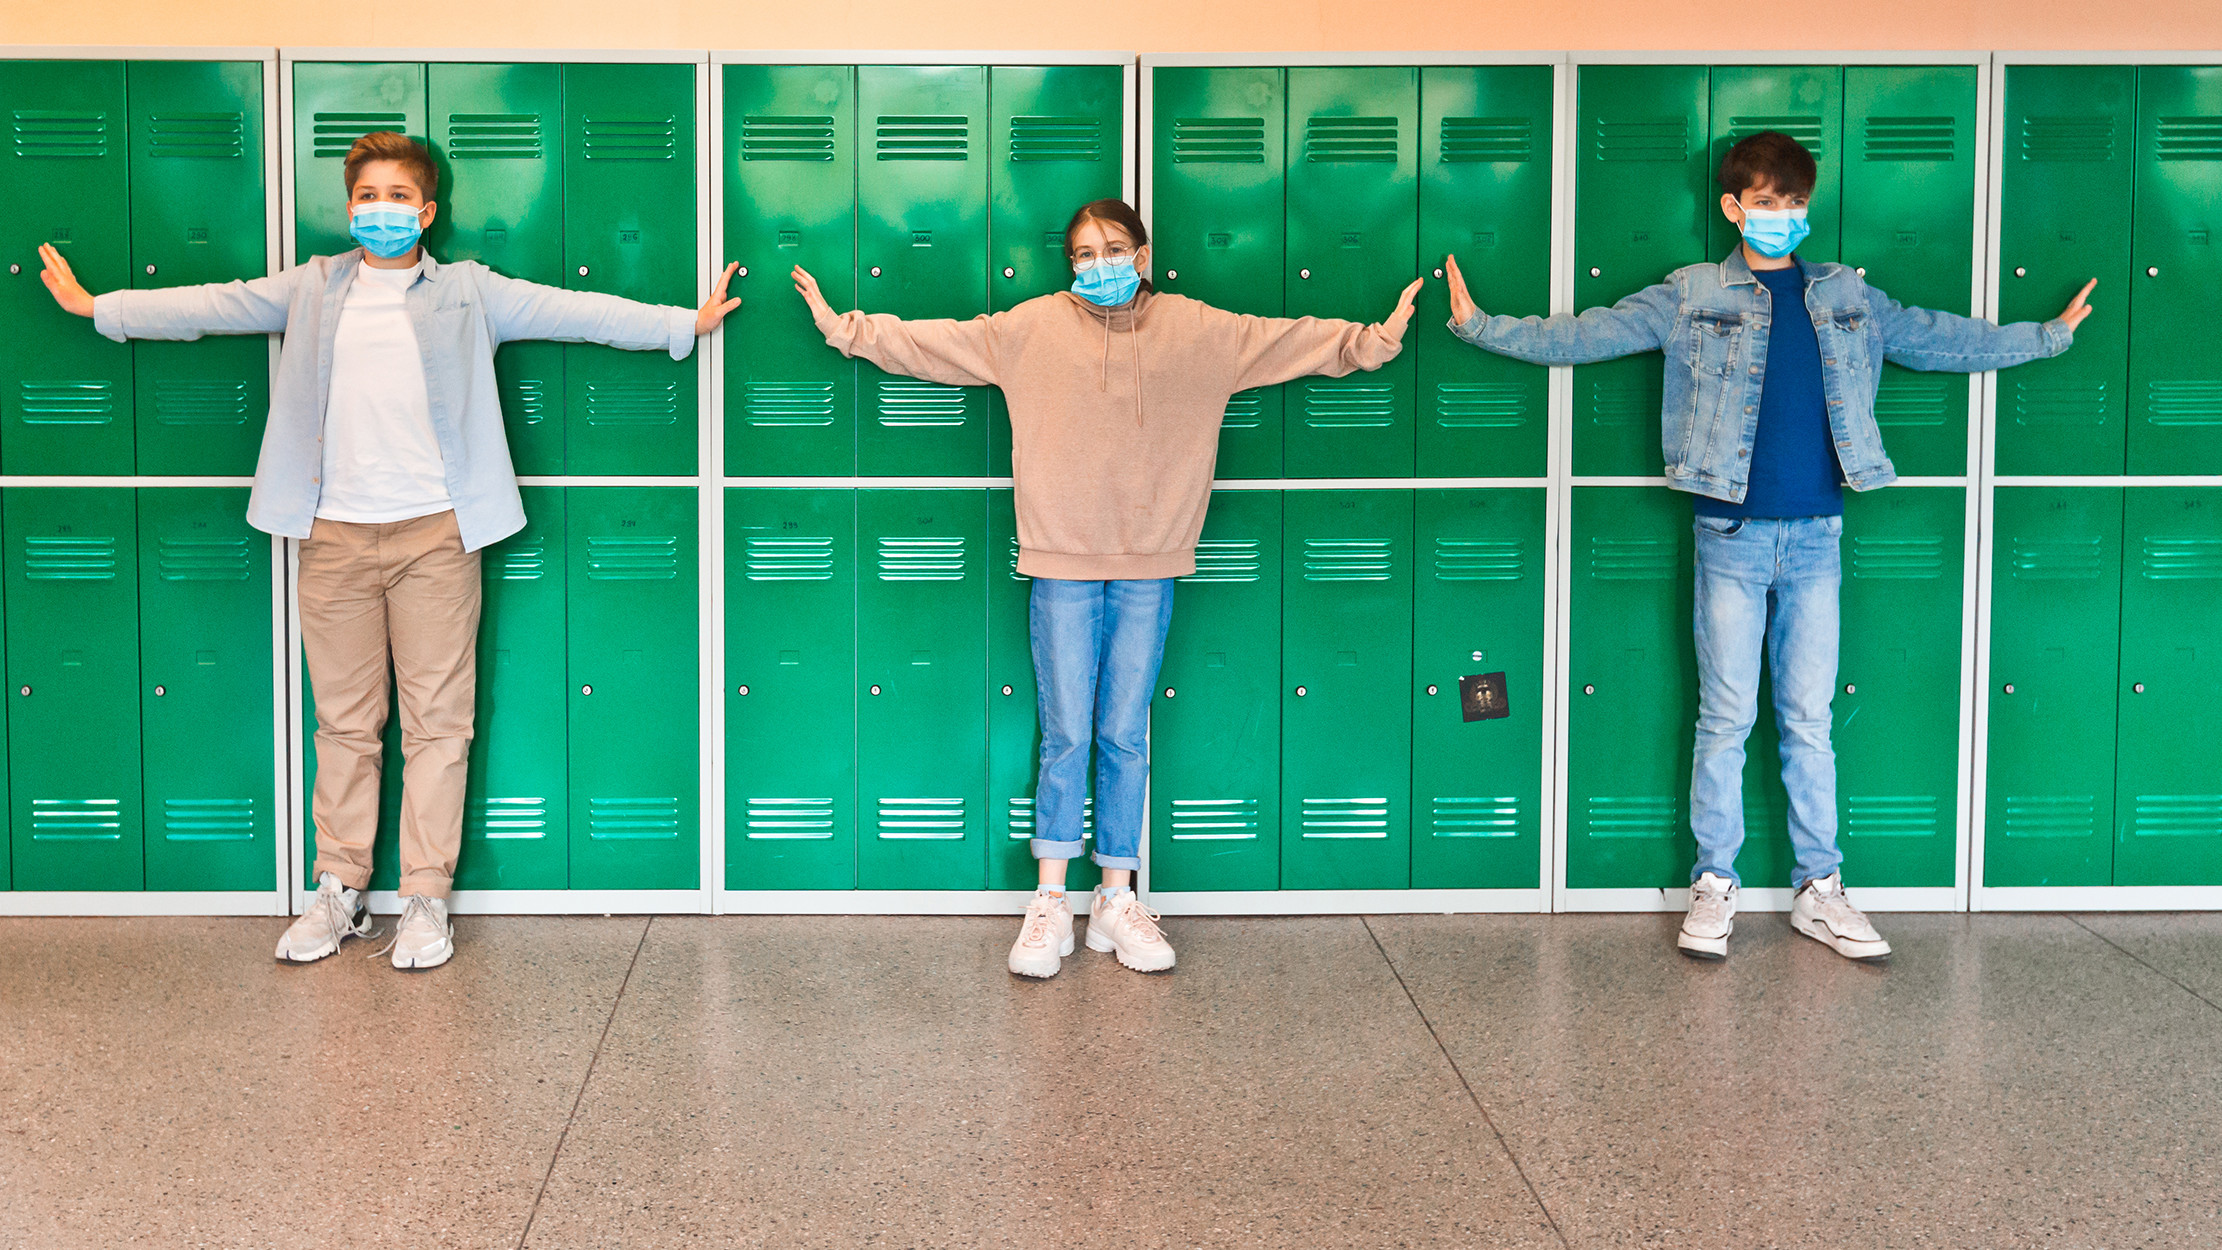 Teenage boys and girl wearing N95 face masks standing in front of school lockers and outstretching arms in the distance. High school students at school.